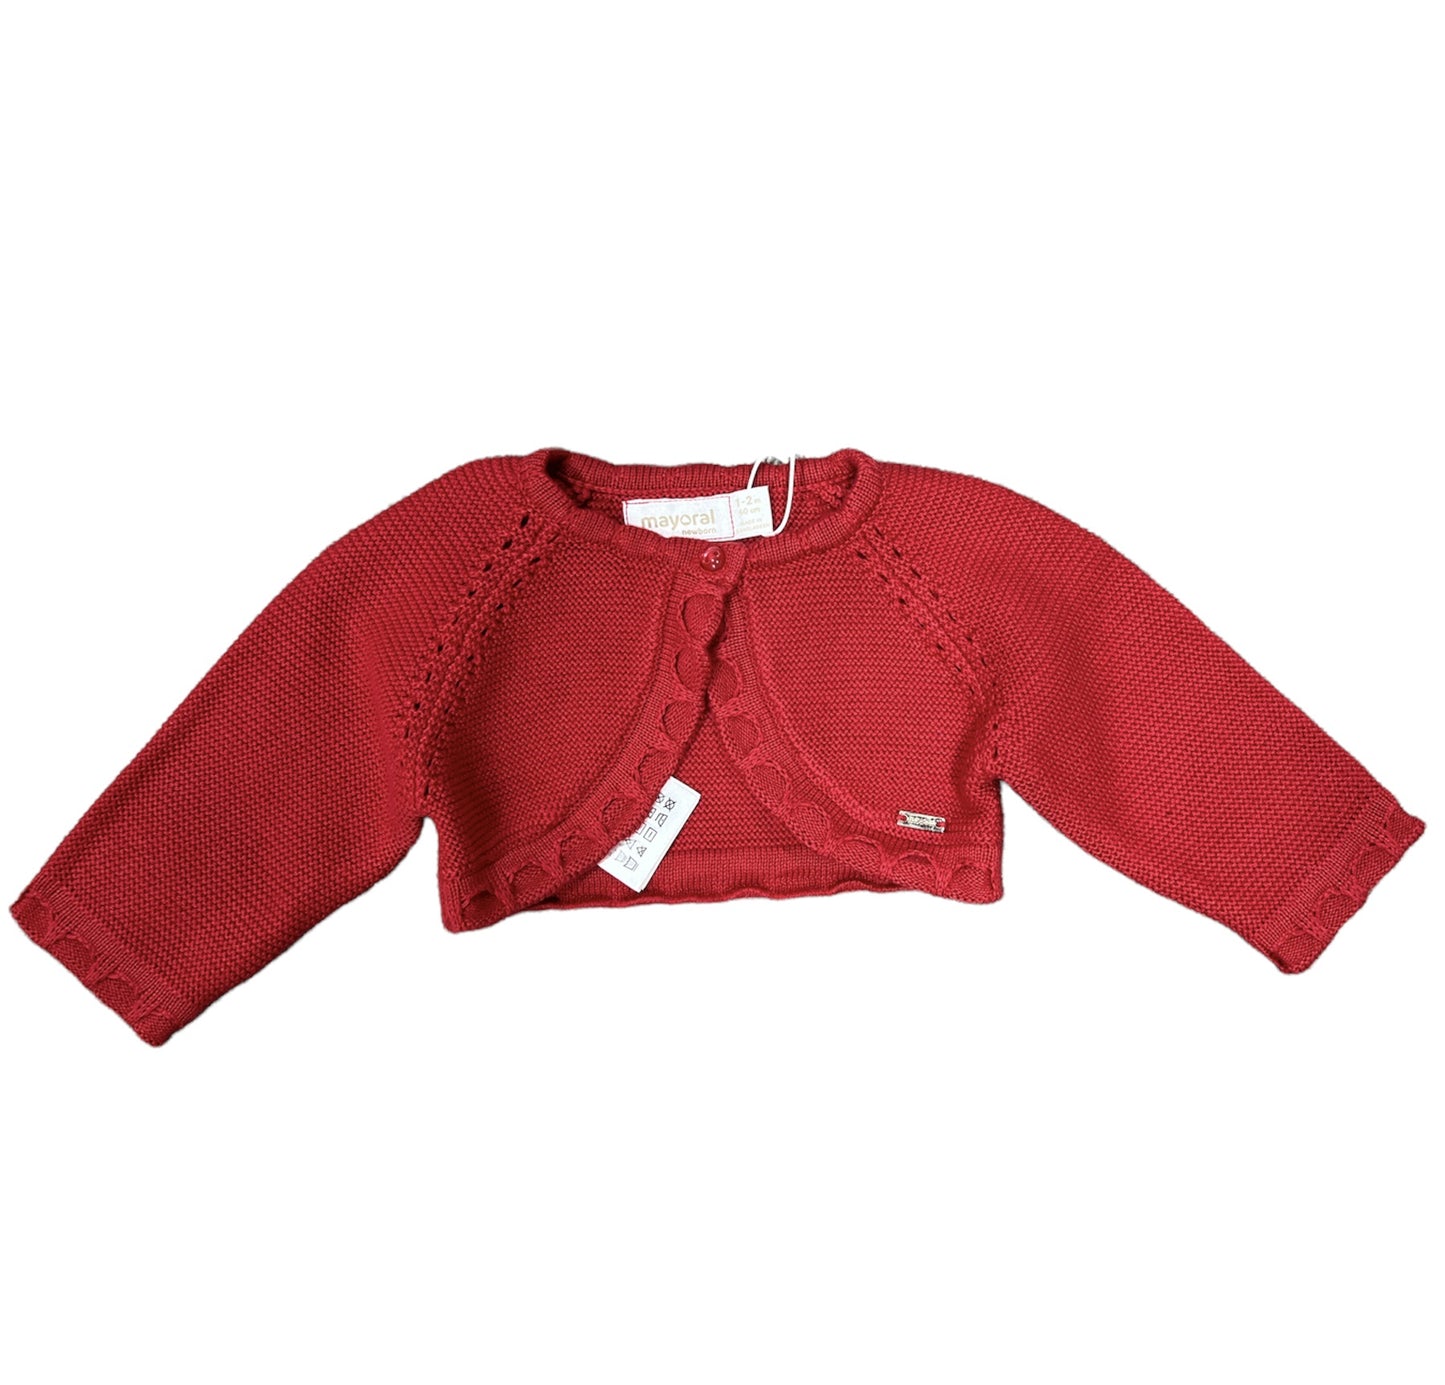 Infant Red Cardigan